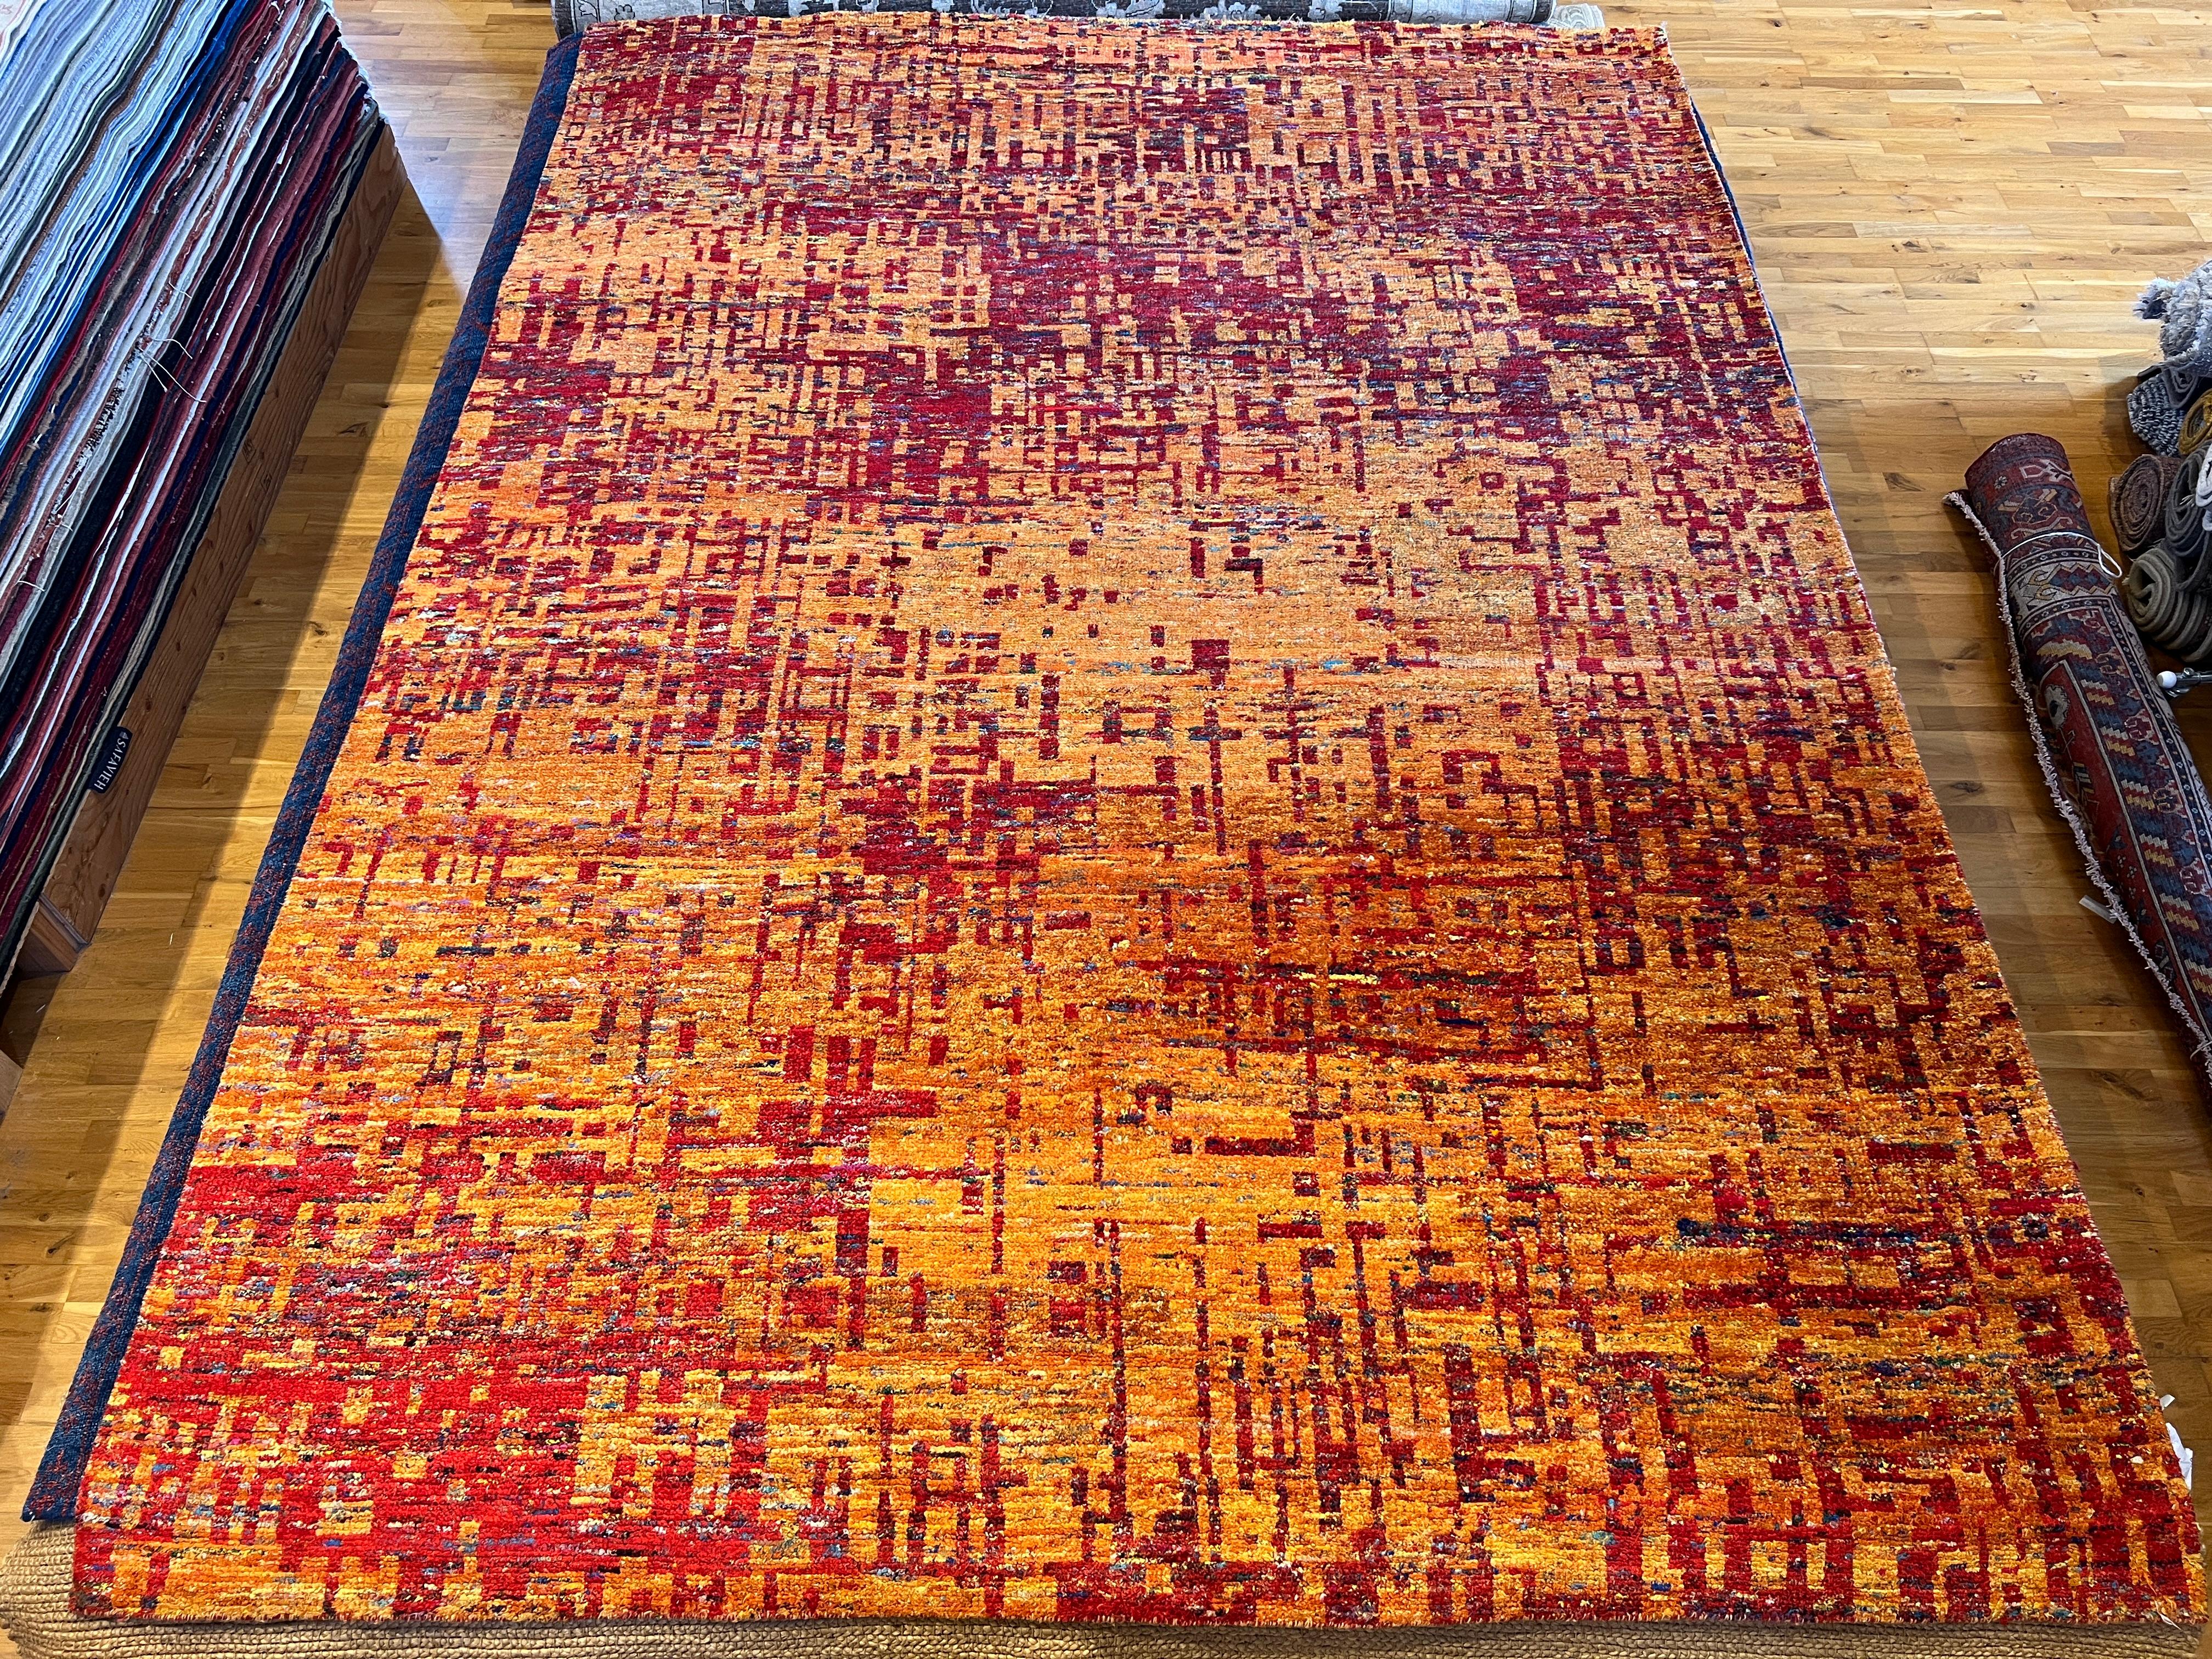 Add a pop of color to your living space with our 9'x12' Abstract Grunge Design Rug. The warm tones of red and orange create a vibrant and modern look, while the abstract design adds a touch of uniqueness. Made with high-quality materials for lasting